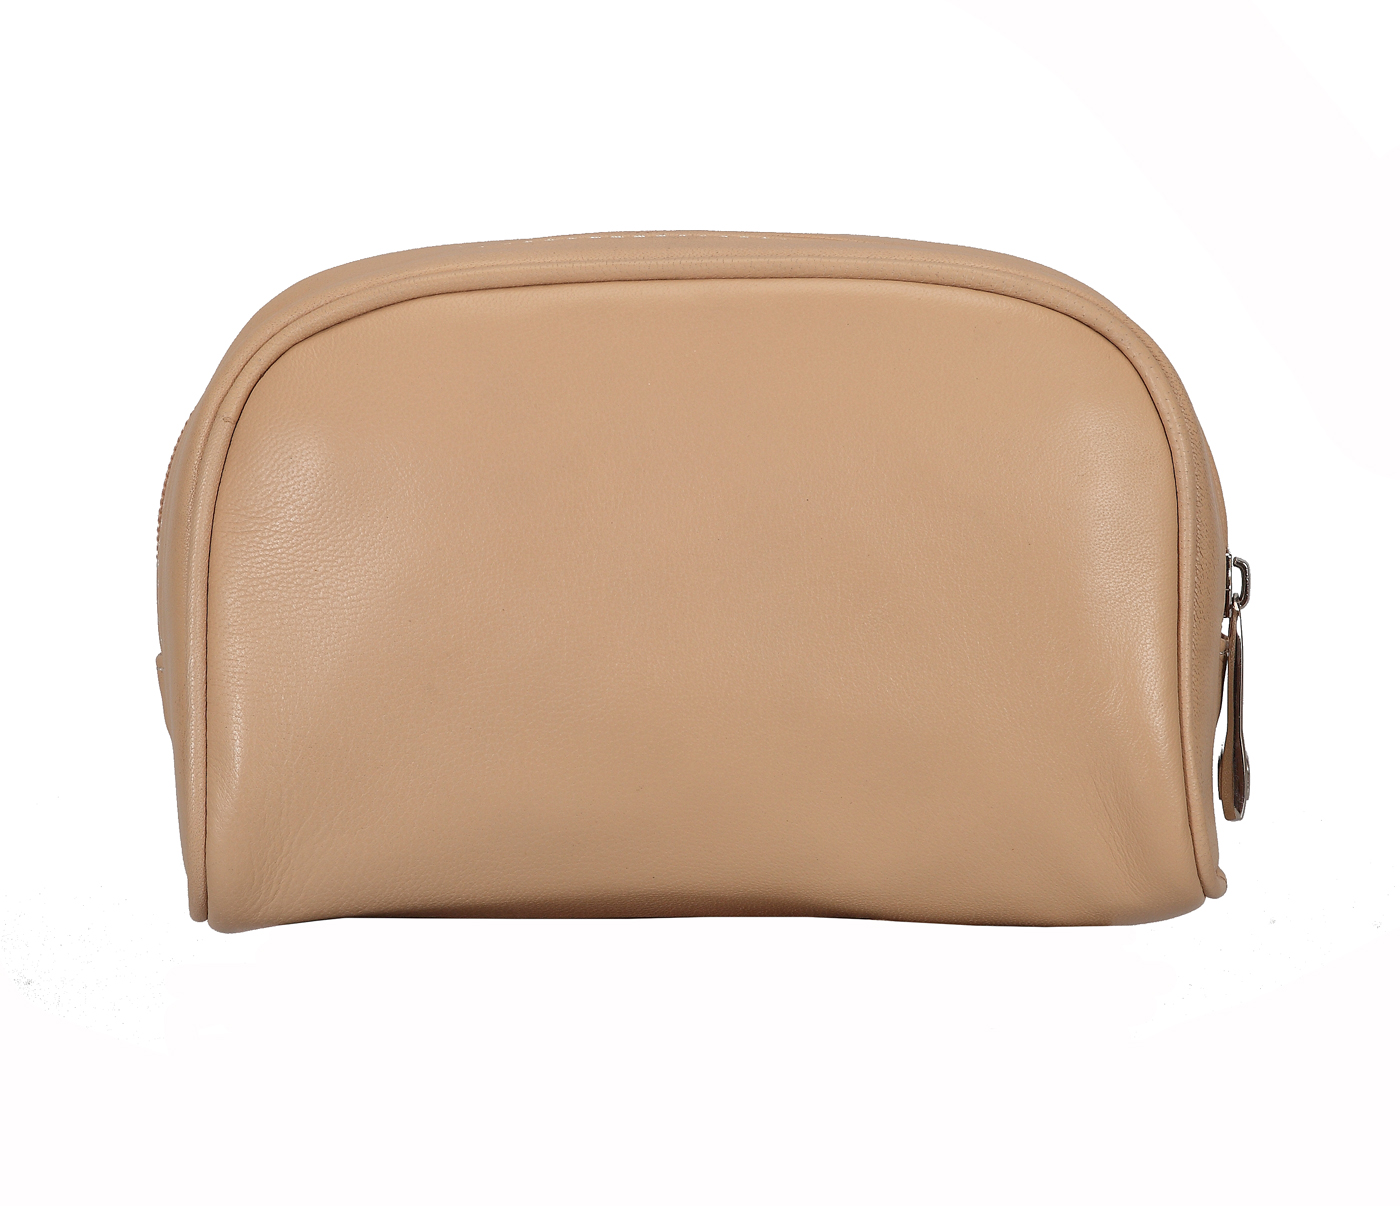 SC4S--Unisex Wash & Toiletry travel Bag in Genuine Leather - Beige